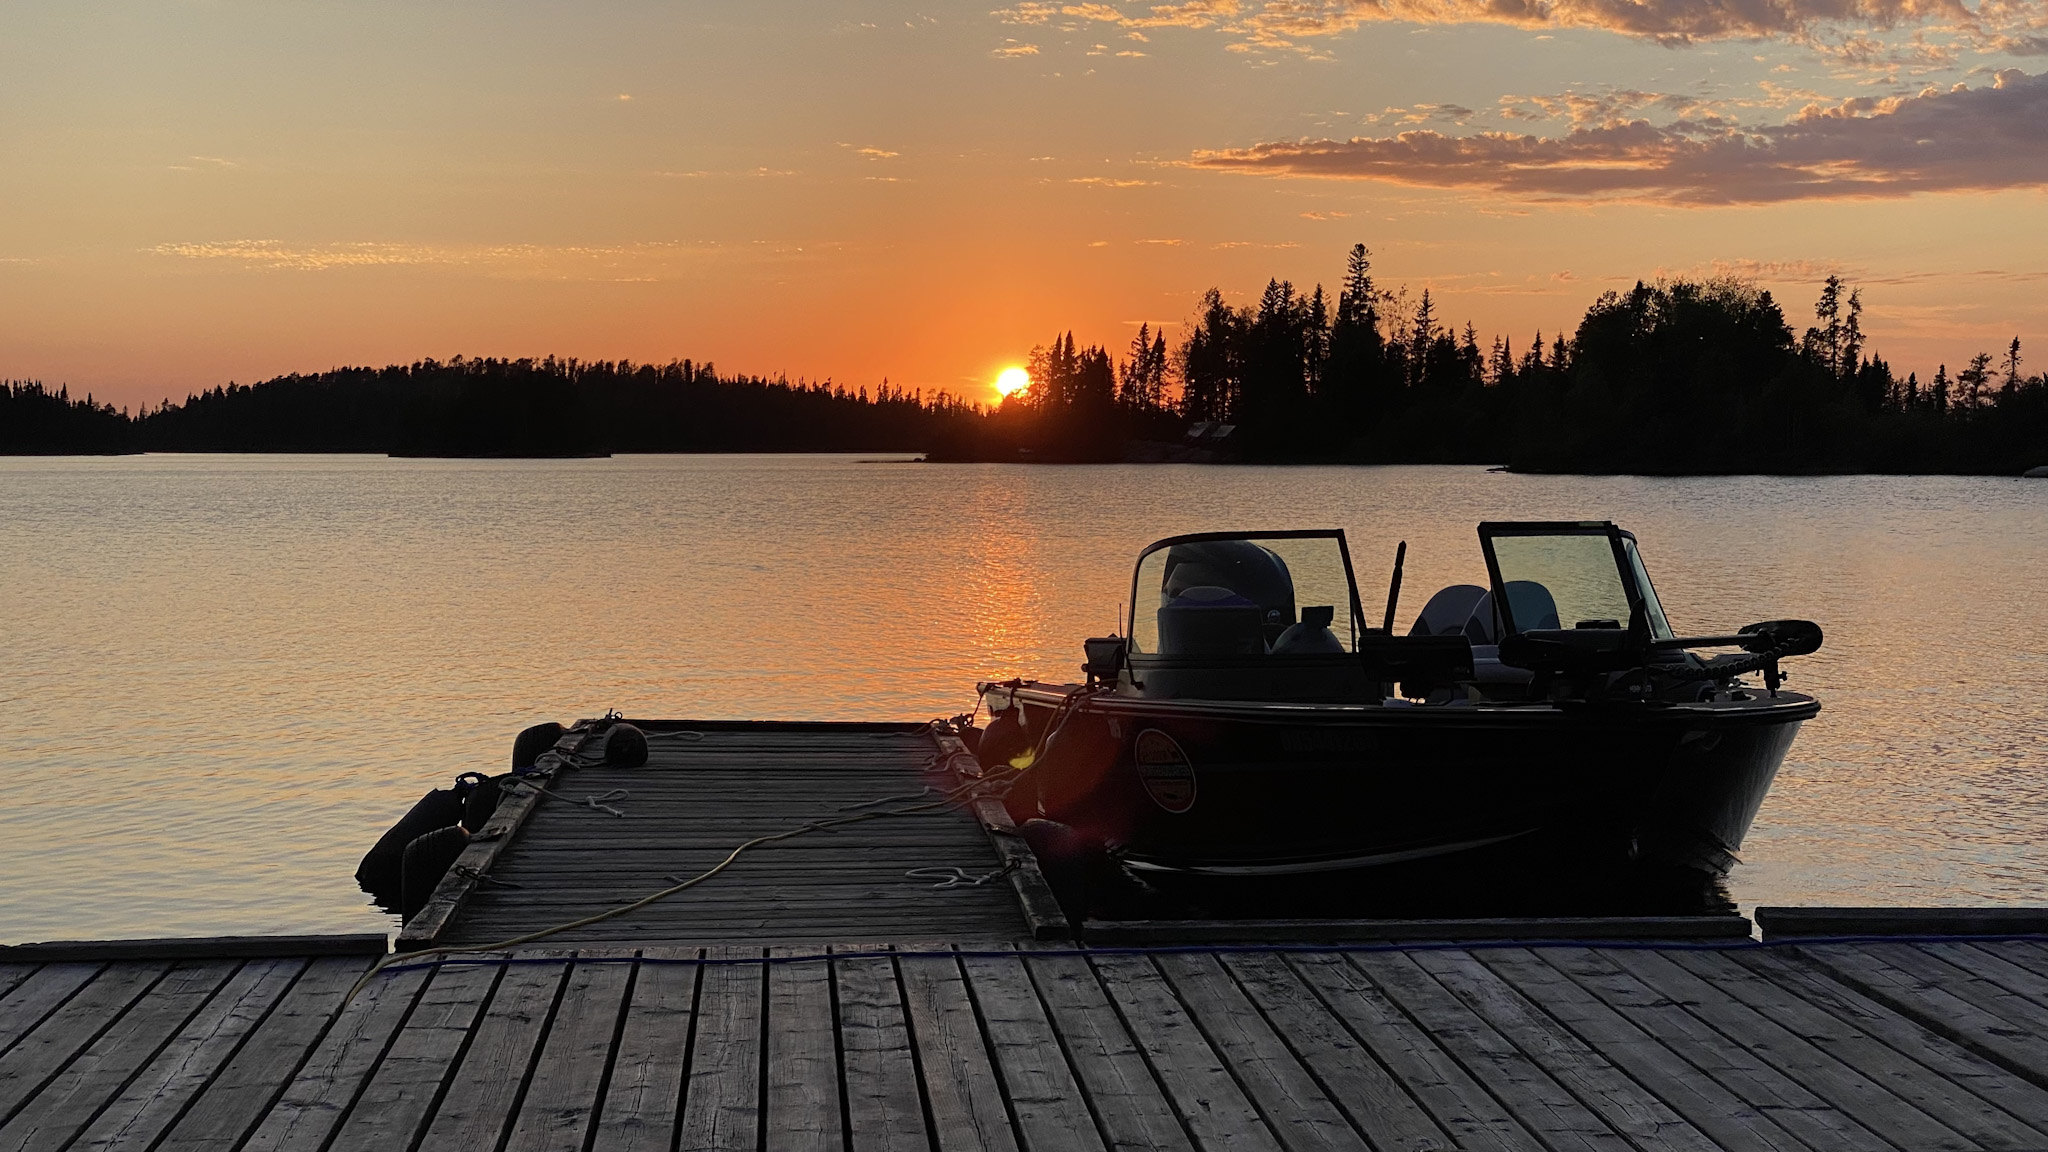 a motorboat next to a wooden dock, silhouetted by an orange sunset over a calm lake.